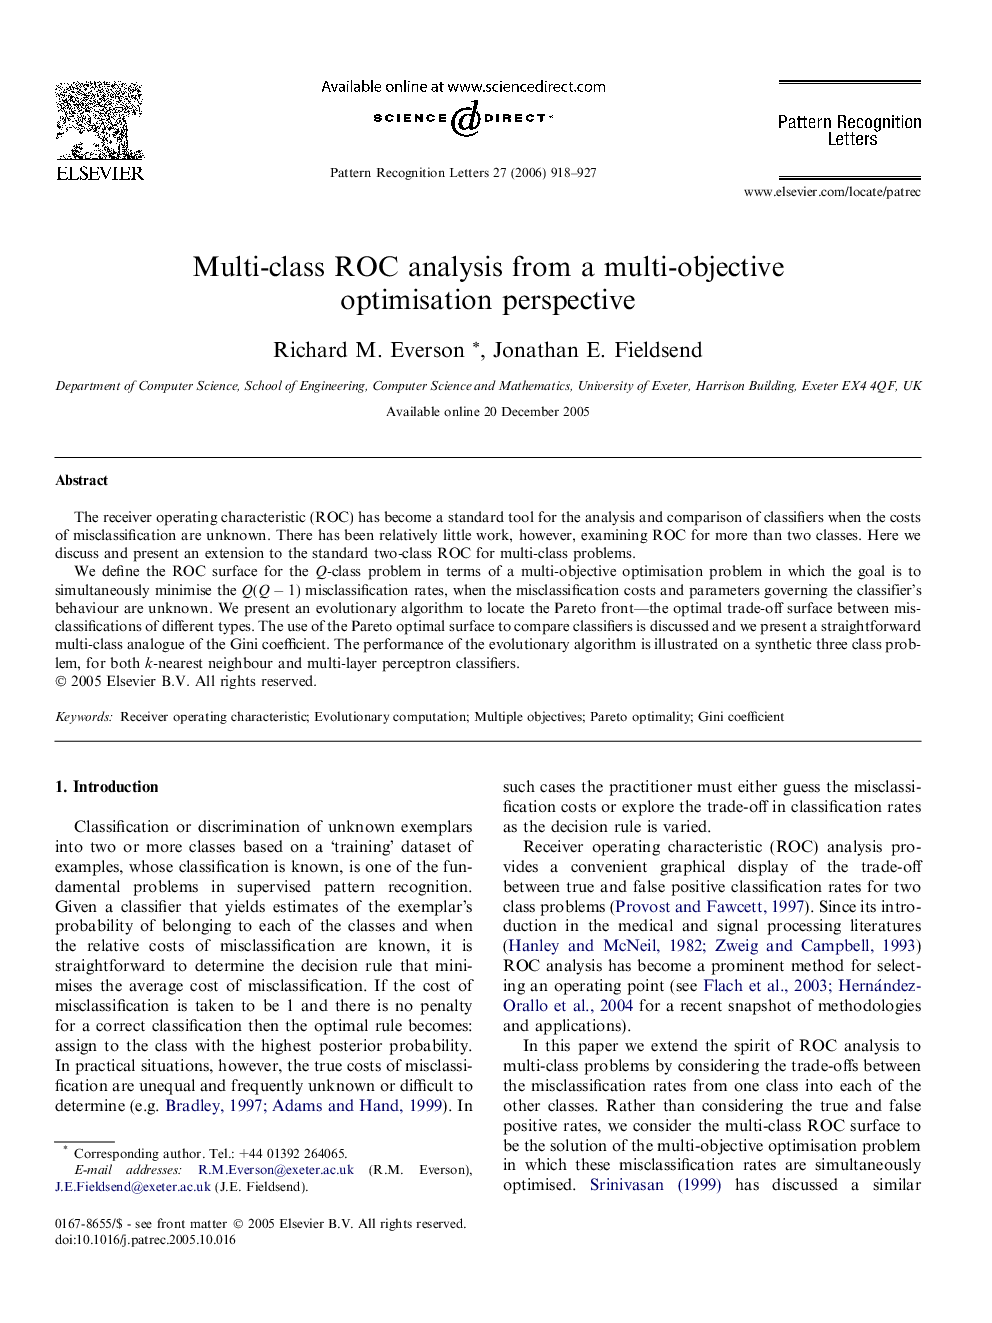 Multi-class ROC analysis from a multi-objective optimisation perspective